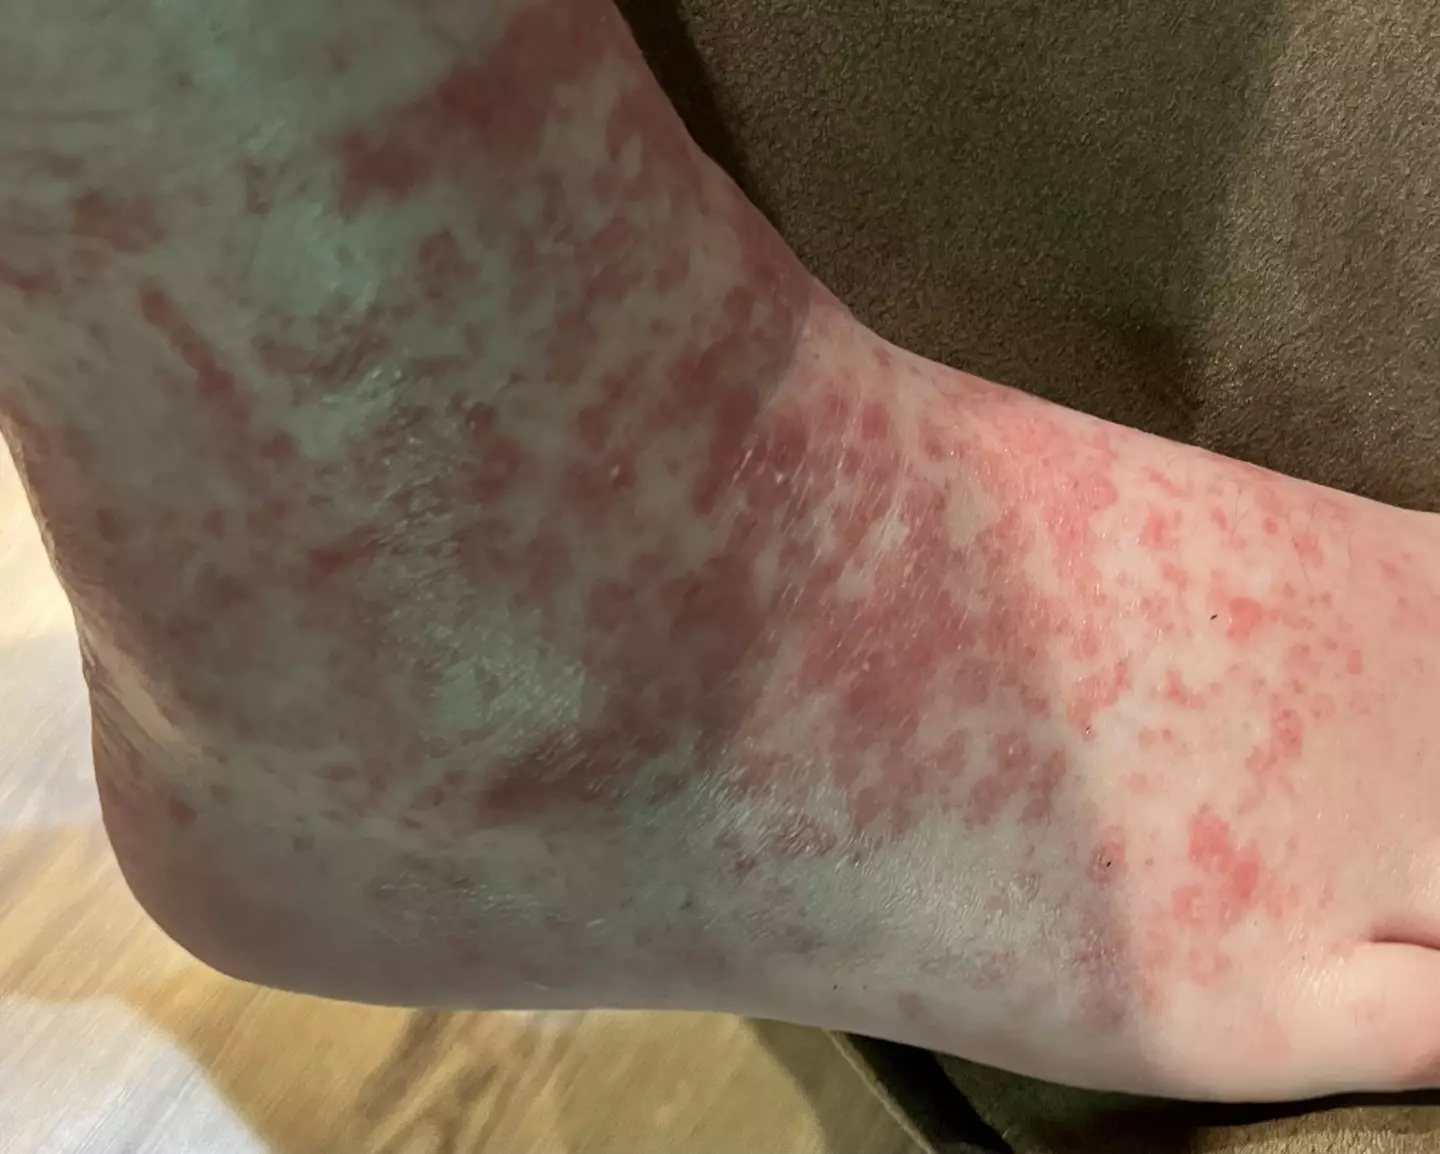 The mum was told that her rash was likely either an allergic reaction to something in the shoes or - the worst case scenario - scabies.